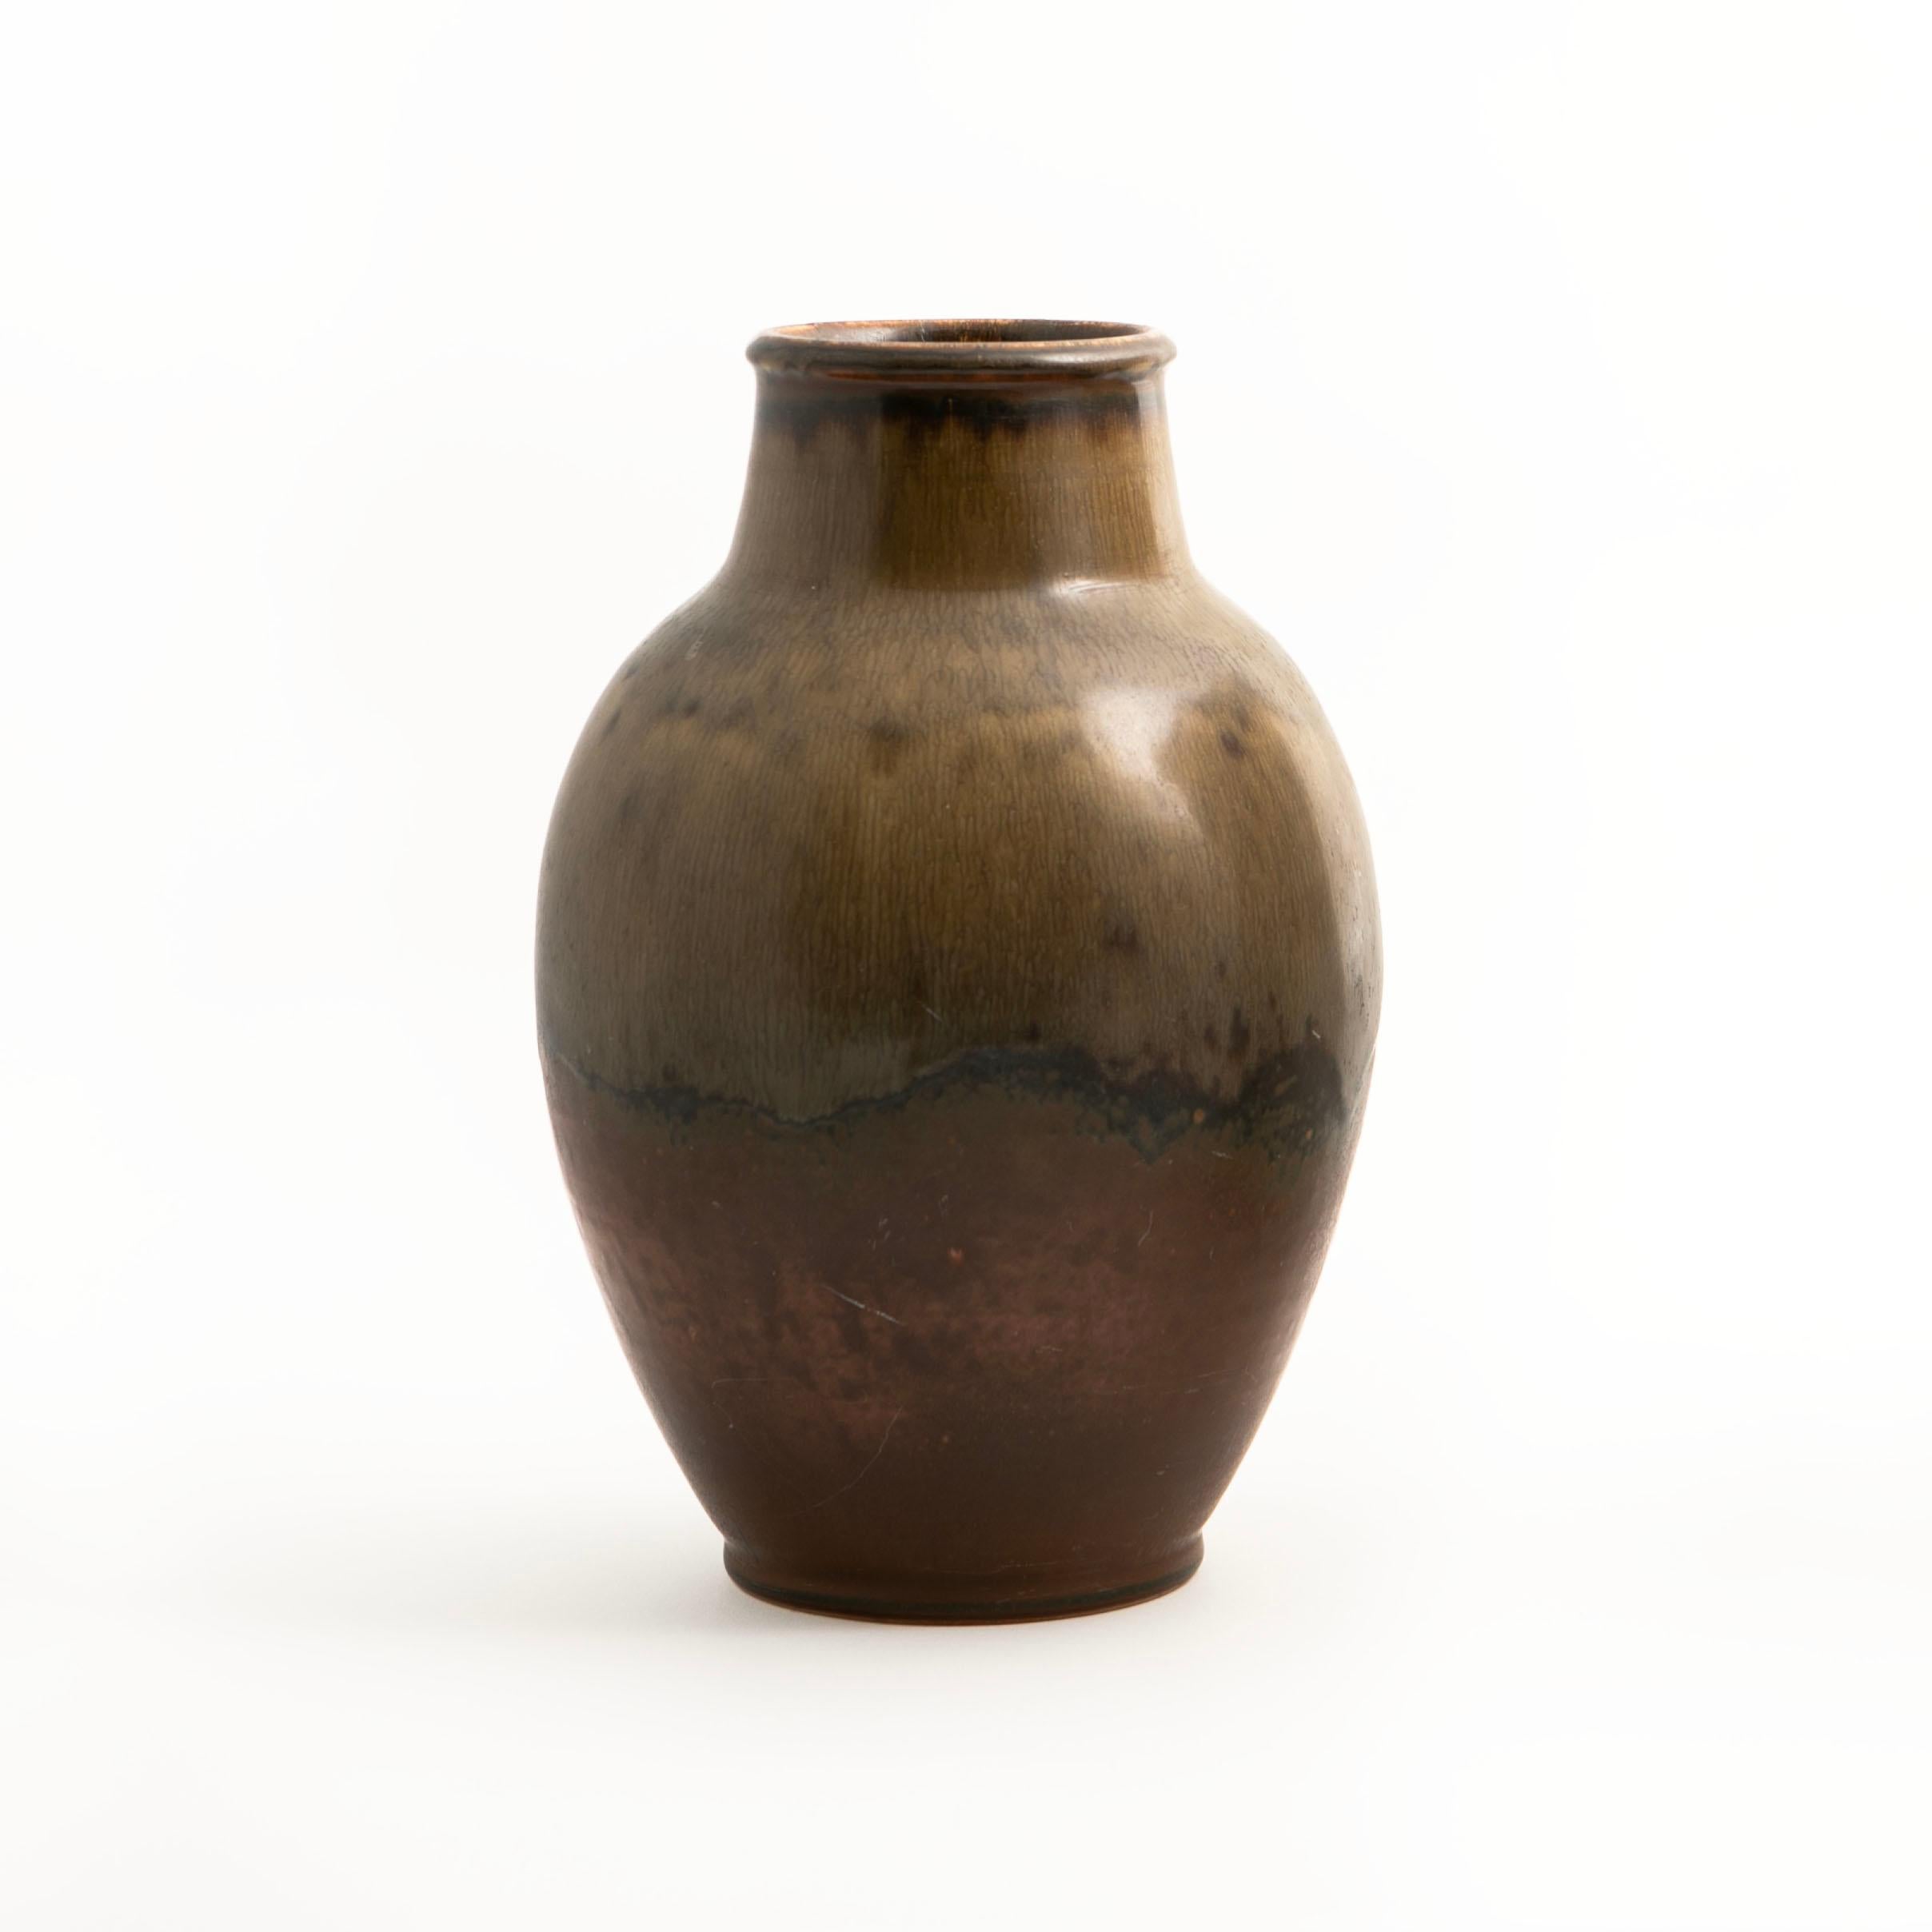 Ebbe Sadolin, Danish 1900-1982

Vase by Ebbe Sadolin for Bing & Grøndal. Height: 29 cm.
Stoneware with an incredibly beautiful glaze in earthy tones.

The vase has a minor repair on the neck, executed so skillfully that it is barely